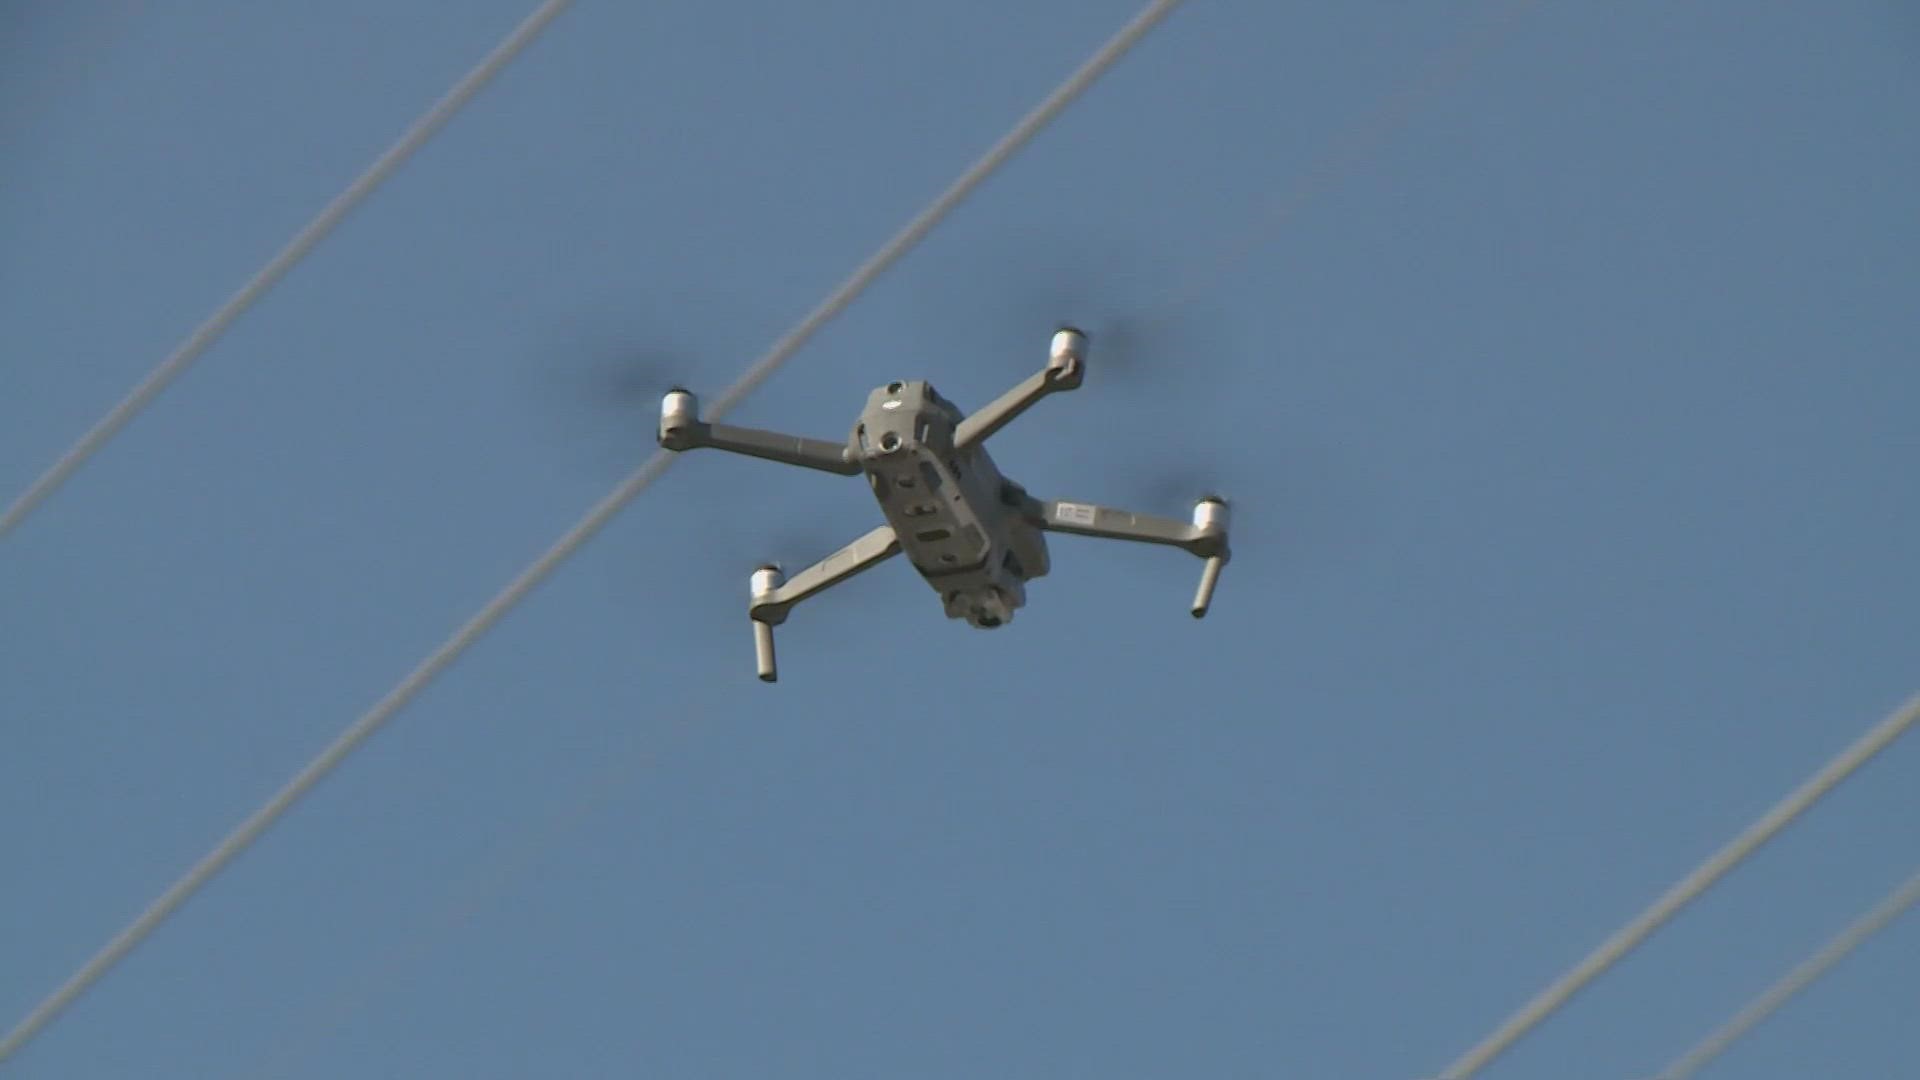 There are many tools that Greensboro Fire uses to fight fires from trucks to hoses, and most recently drones.